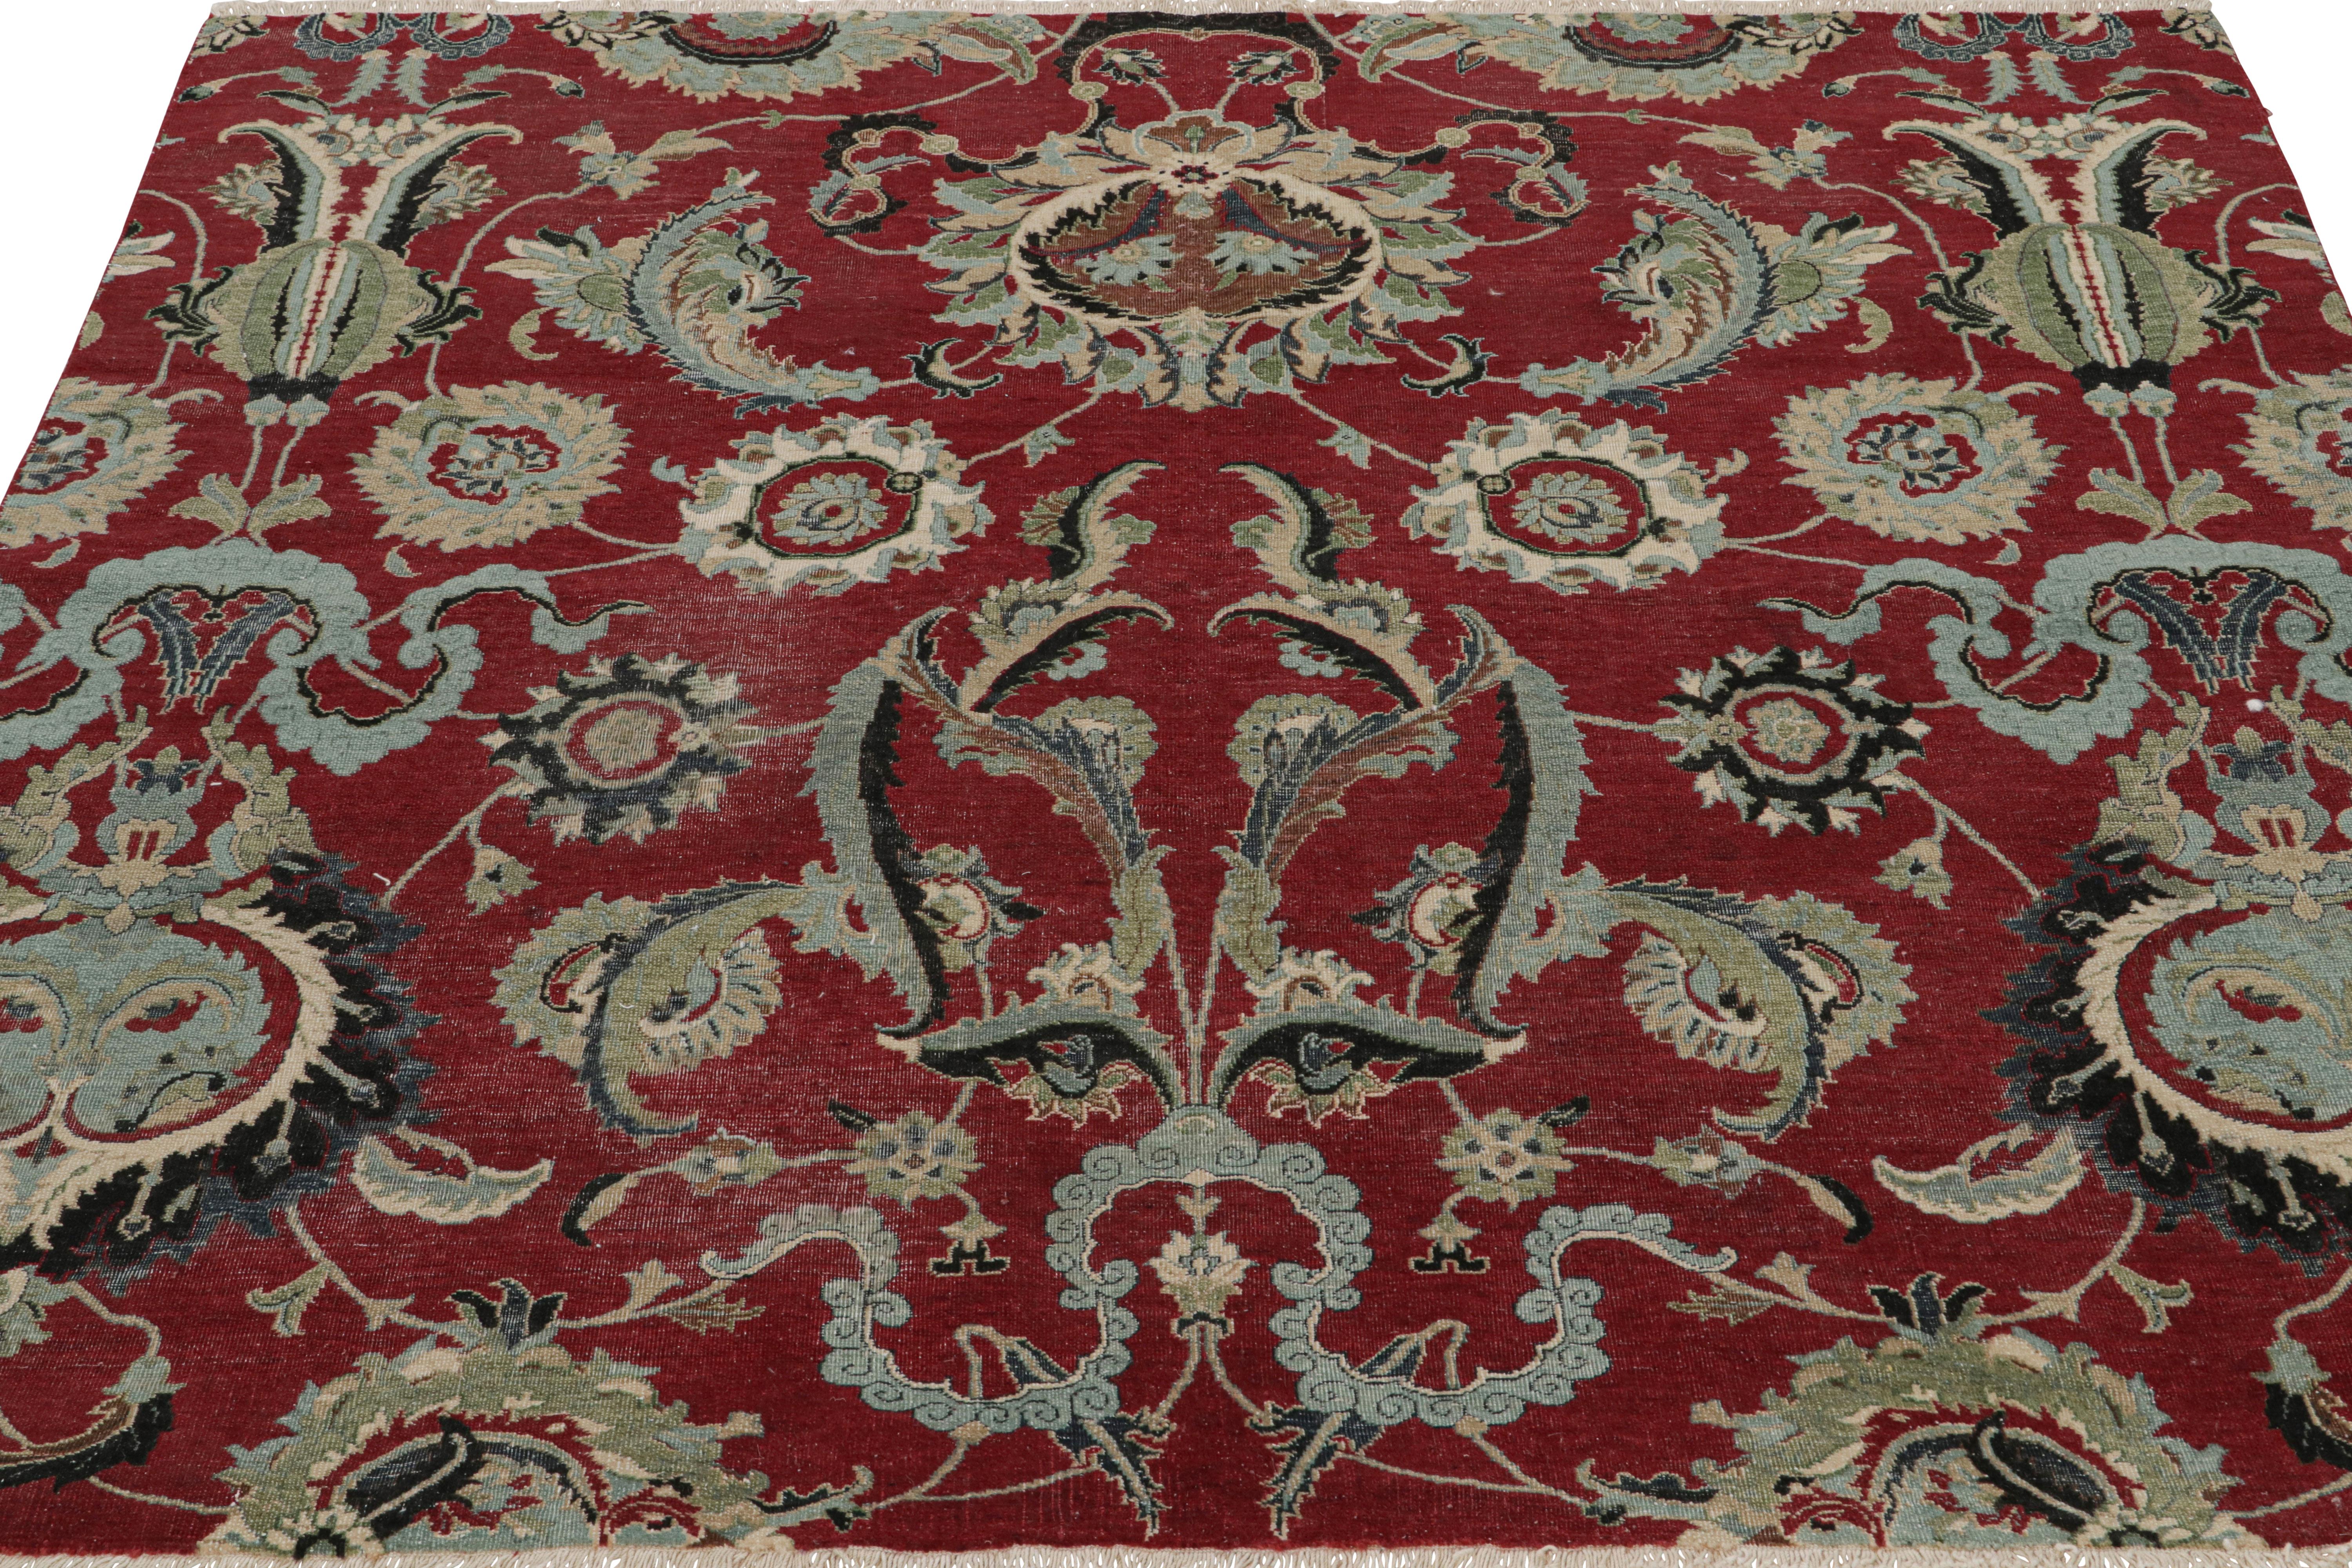 Hand-Knotted Rug & Kilim’s Persian Isfahan Style Square Rug in Burgundy with Floral Patterns For Sale